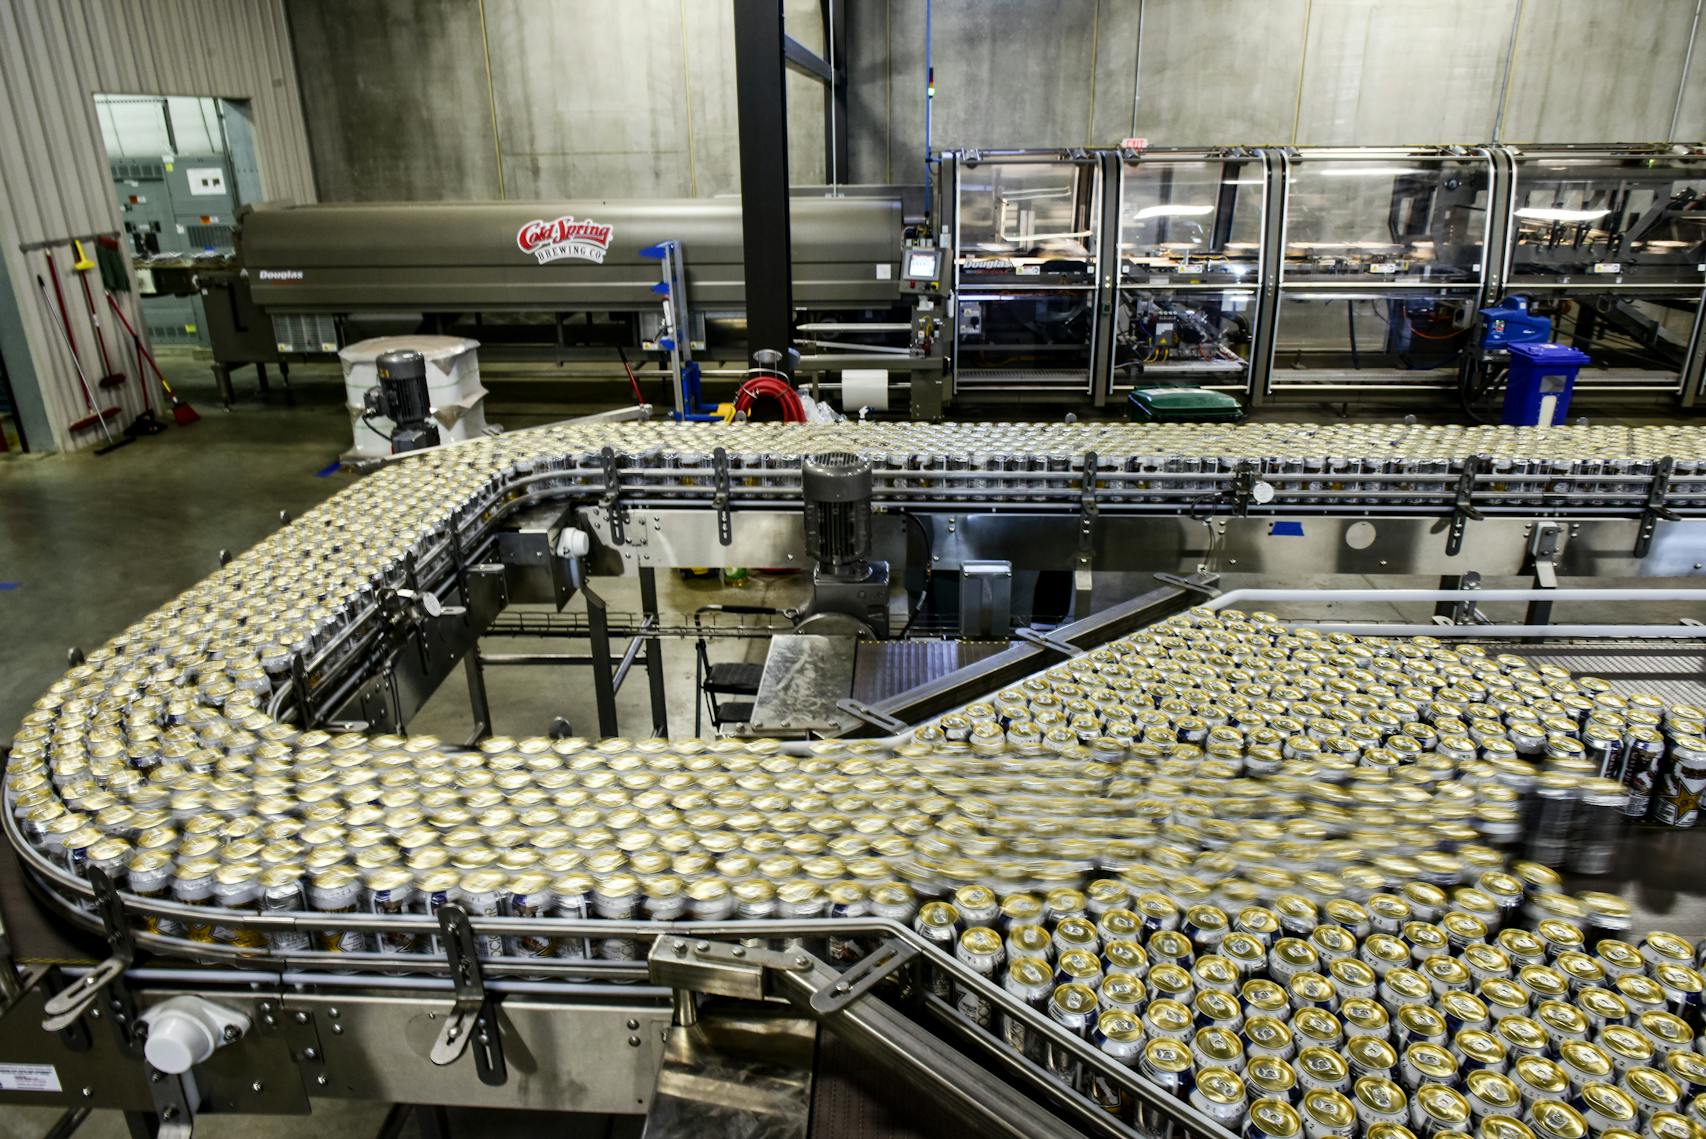 Cans of Rockstar energy drink moved along the production line at Cold Spring Brewing's new facility.